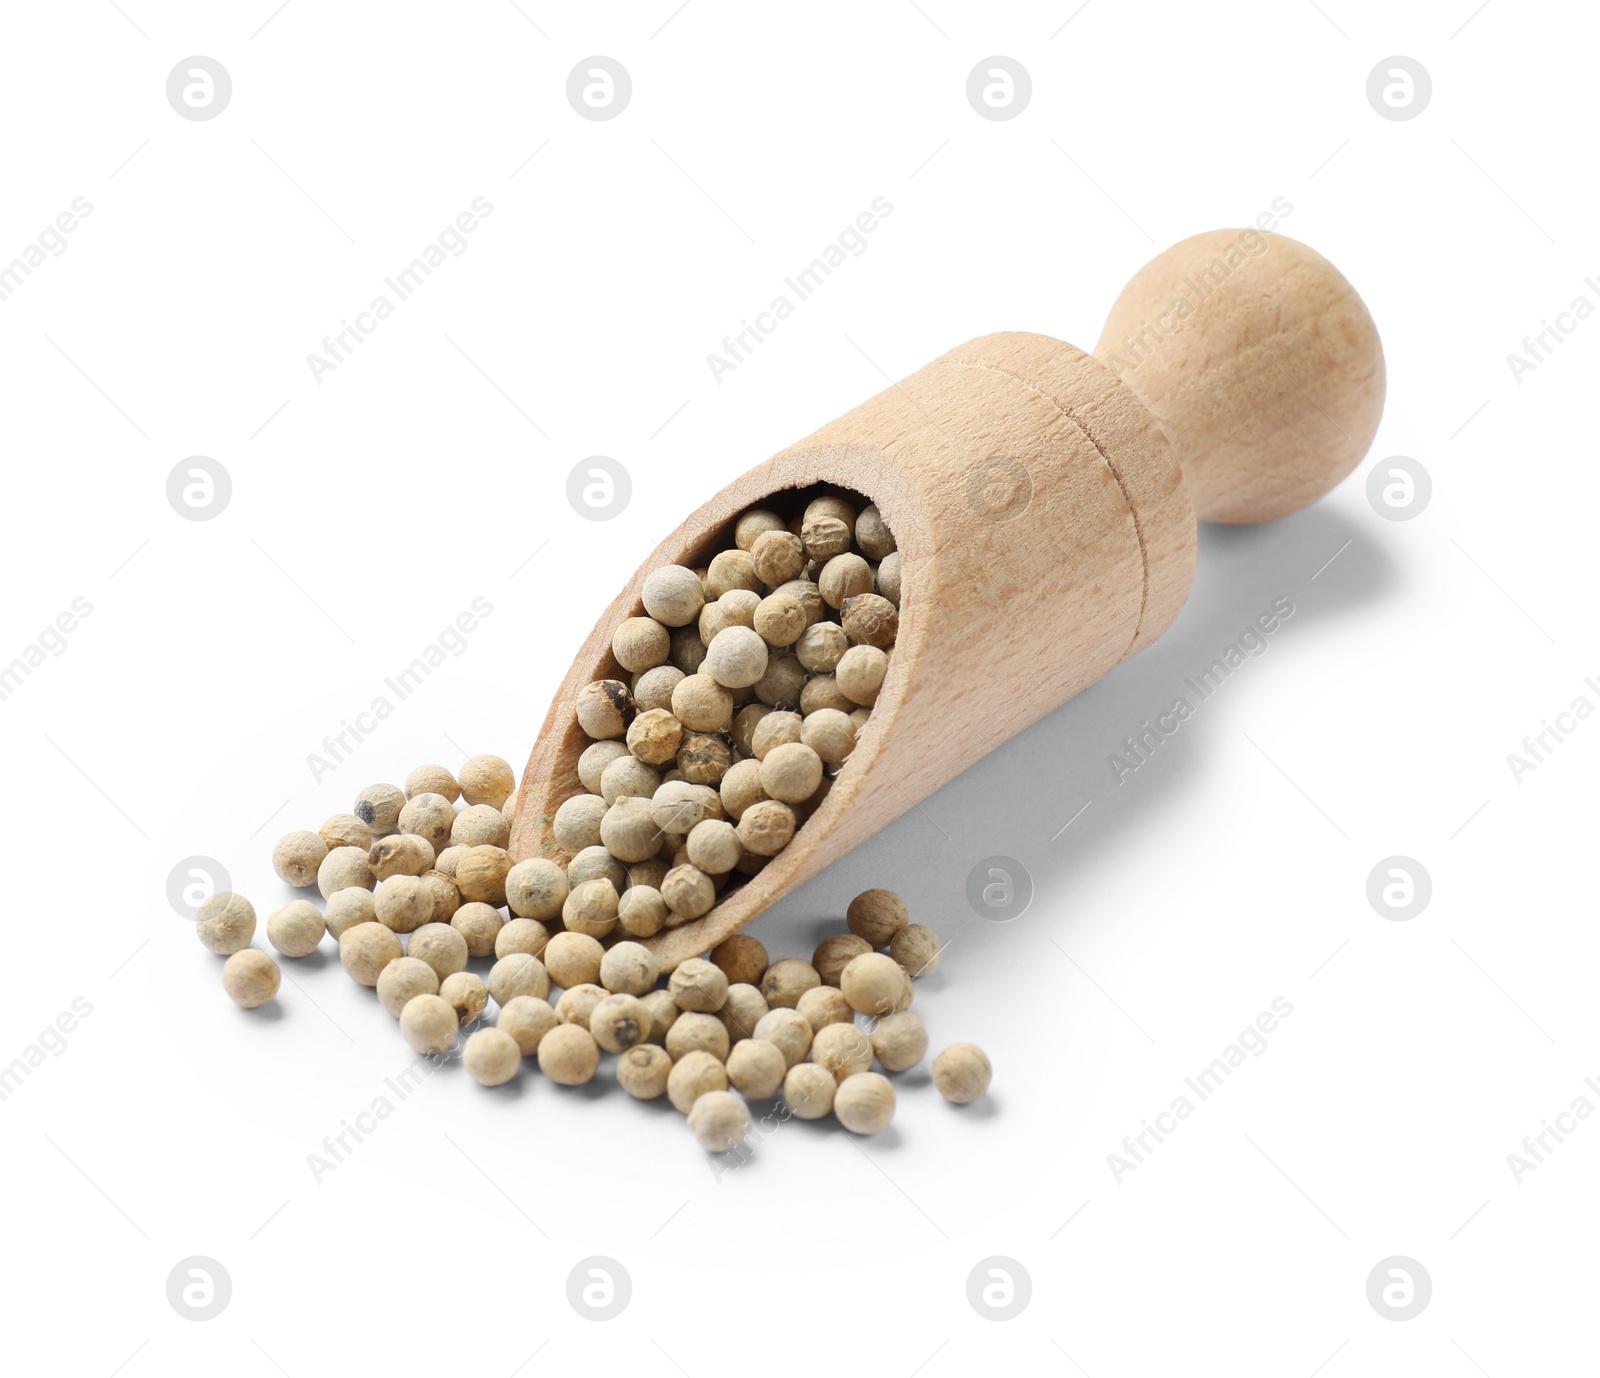 Photo of Aromatic spice. Many peppercorns in scoop isolated on white